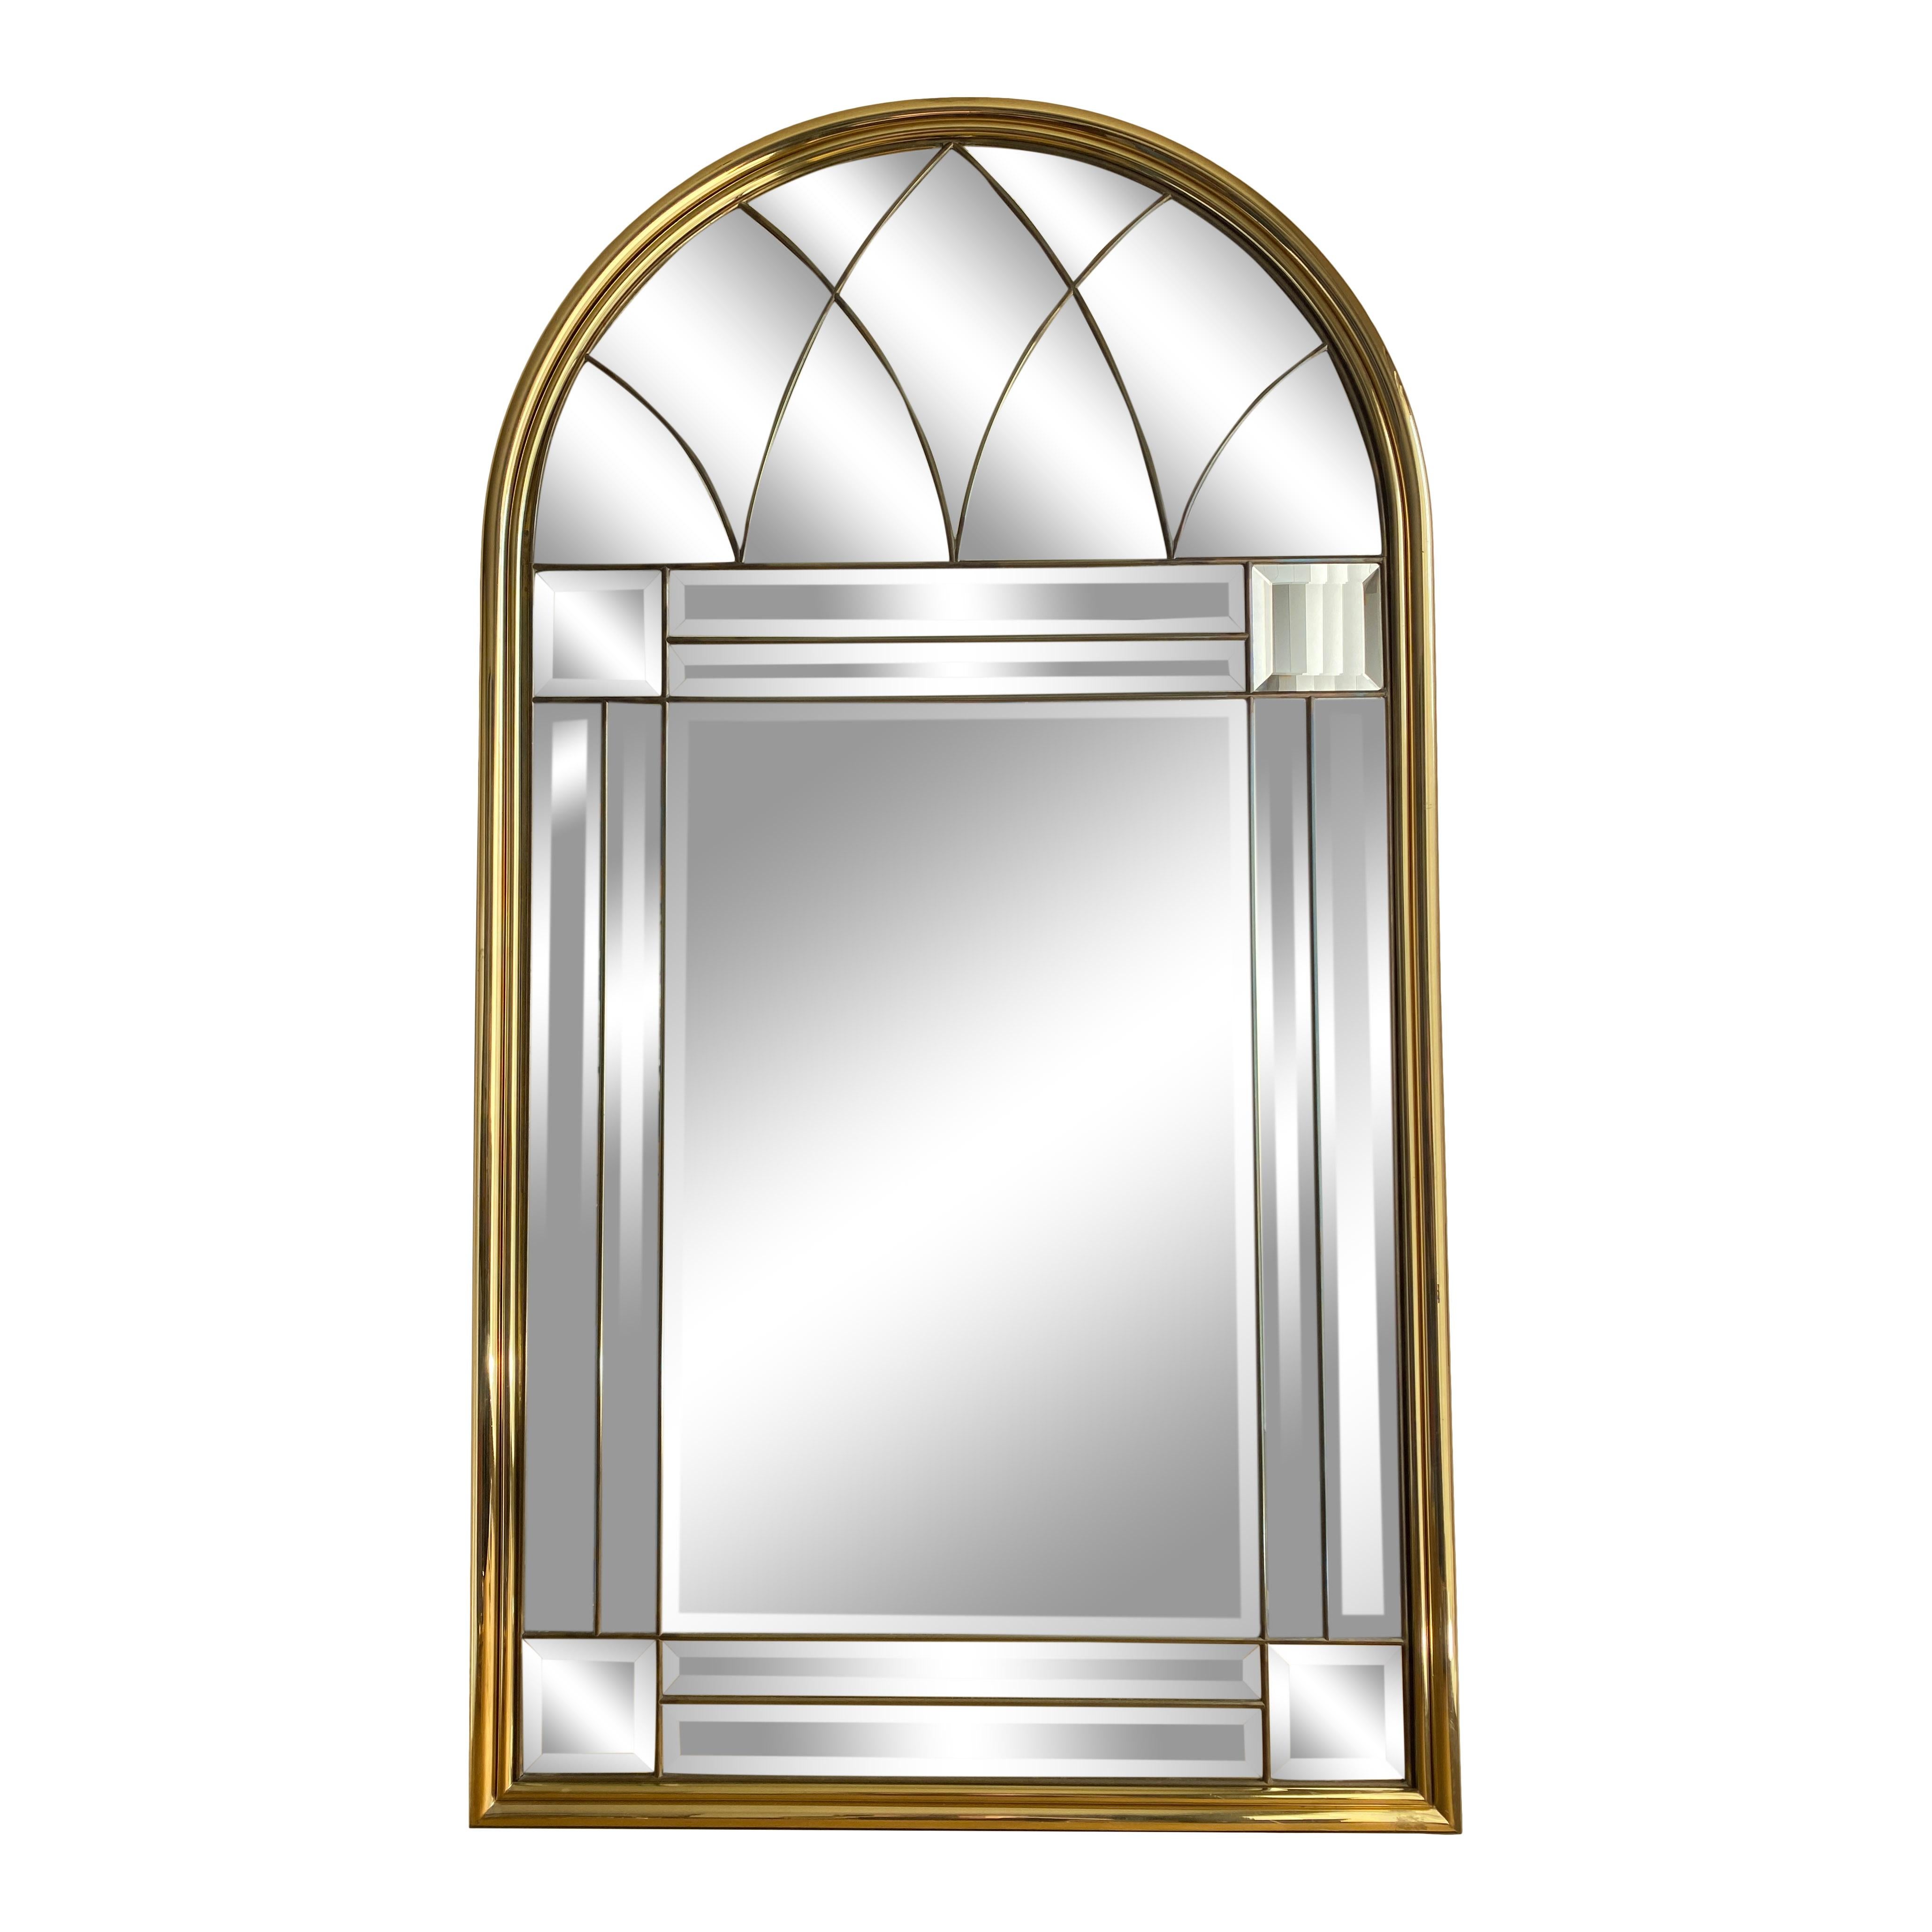 Brass framed beveled wall mirror by LaBarge Italy.